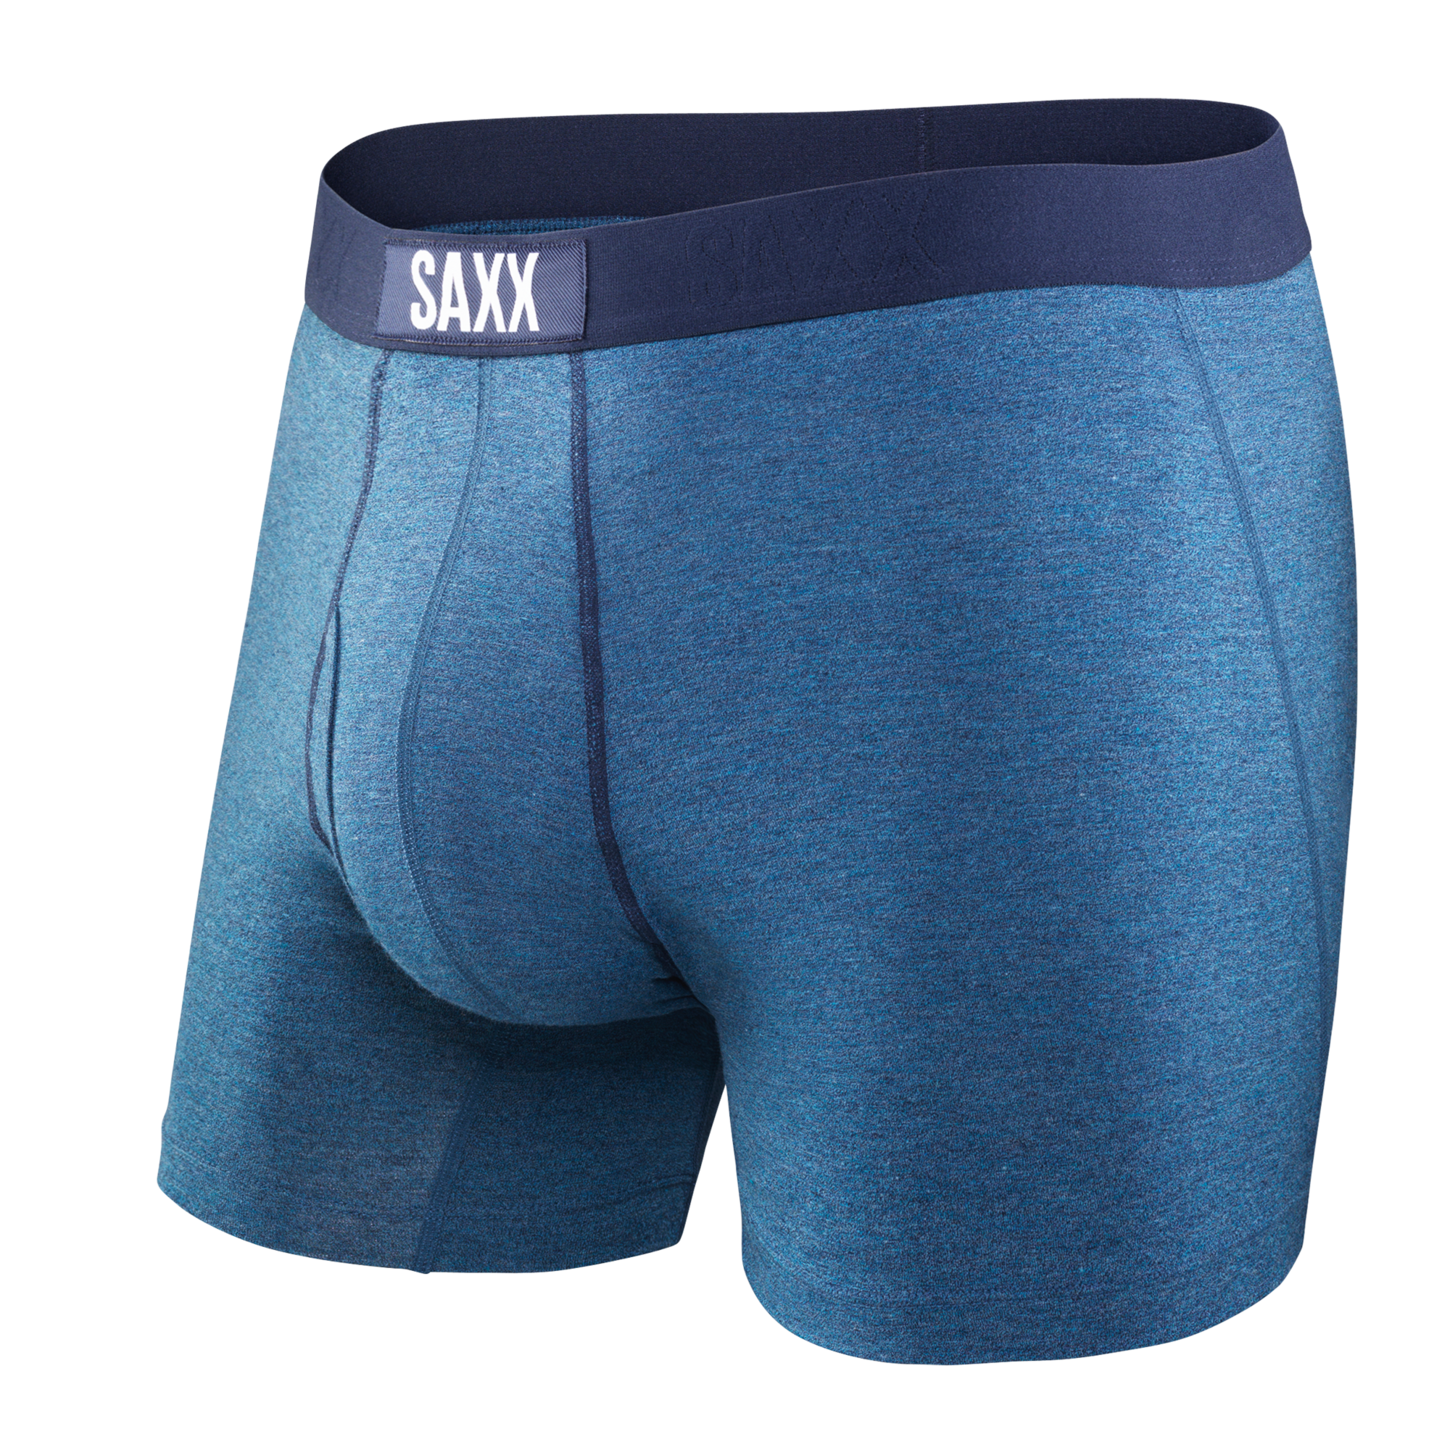 Guest Post: Product Review of Saxx Vibe Boxer Briefs by Jason - A  Sophisticated Notion